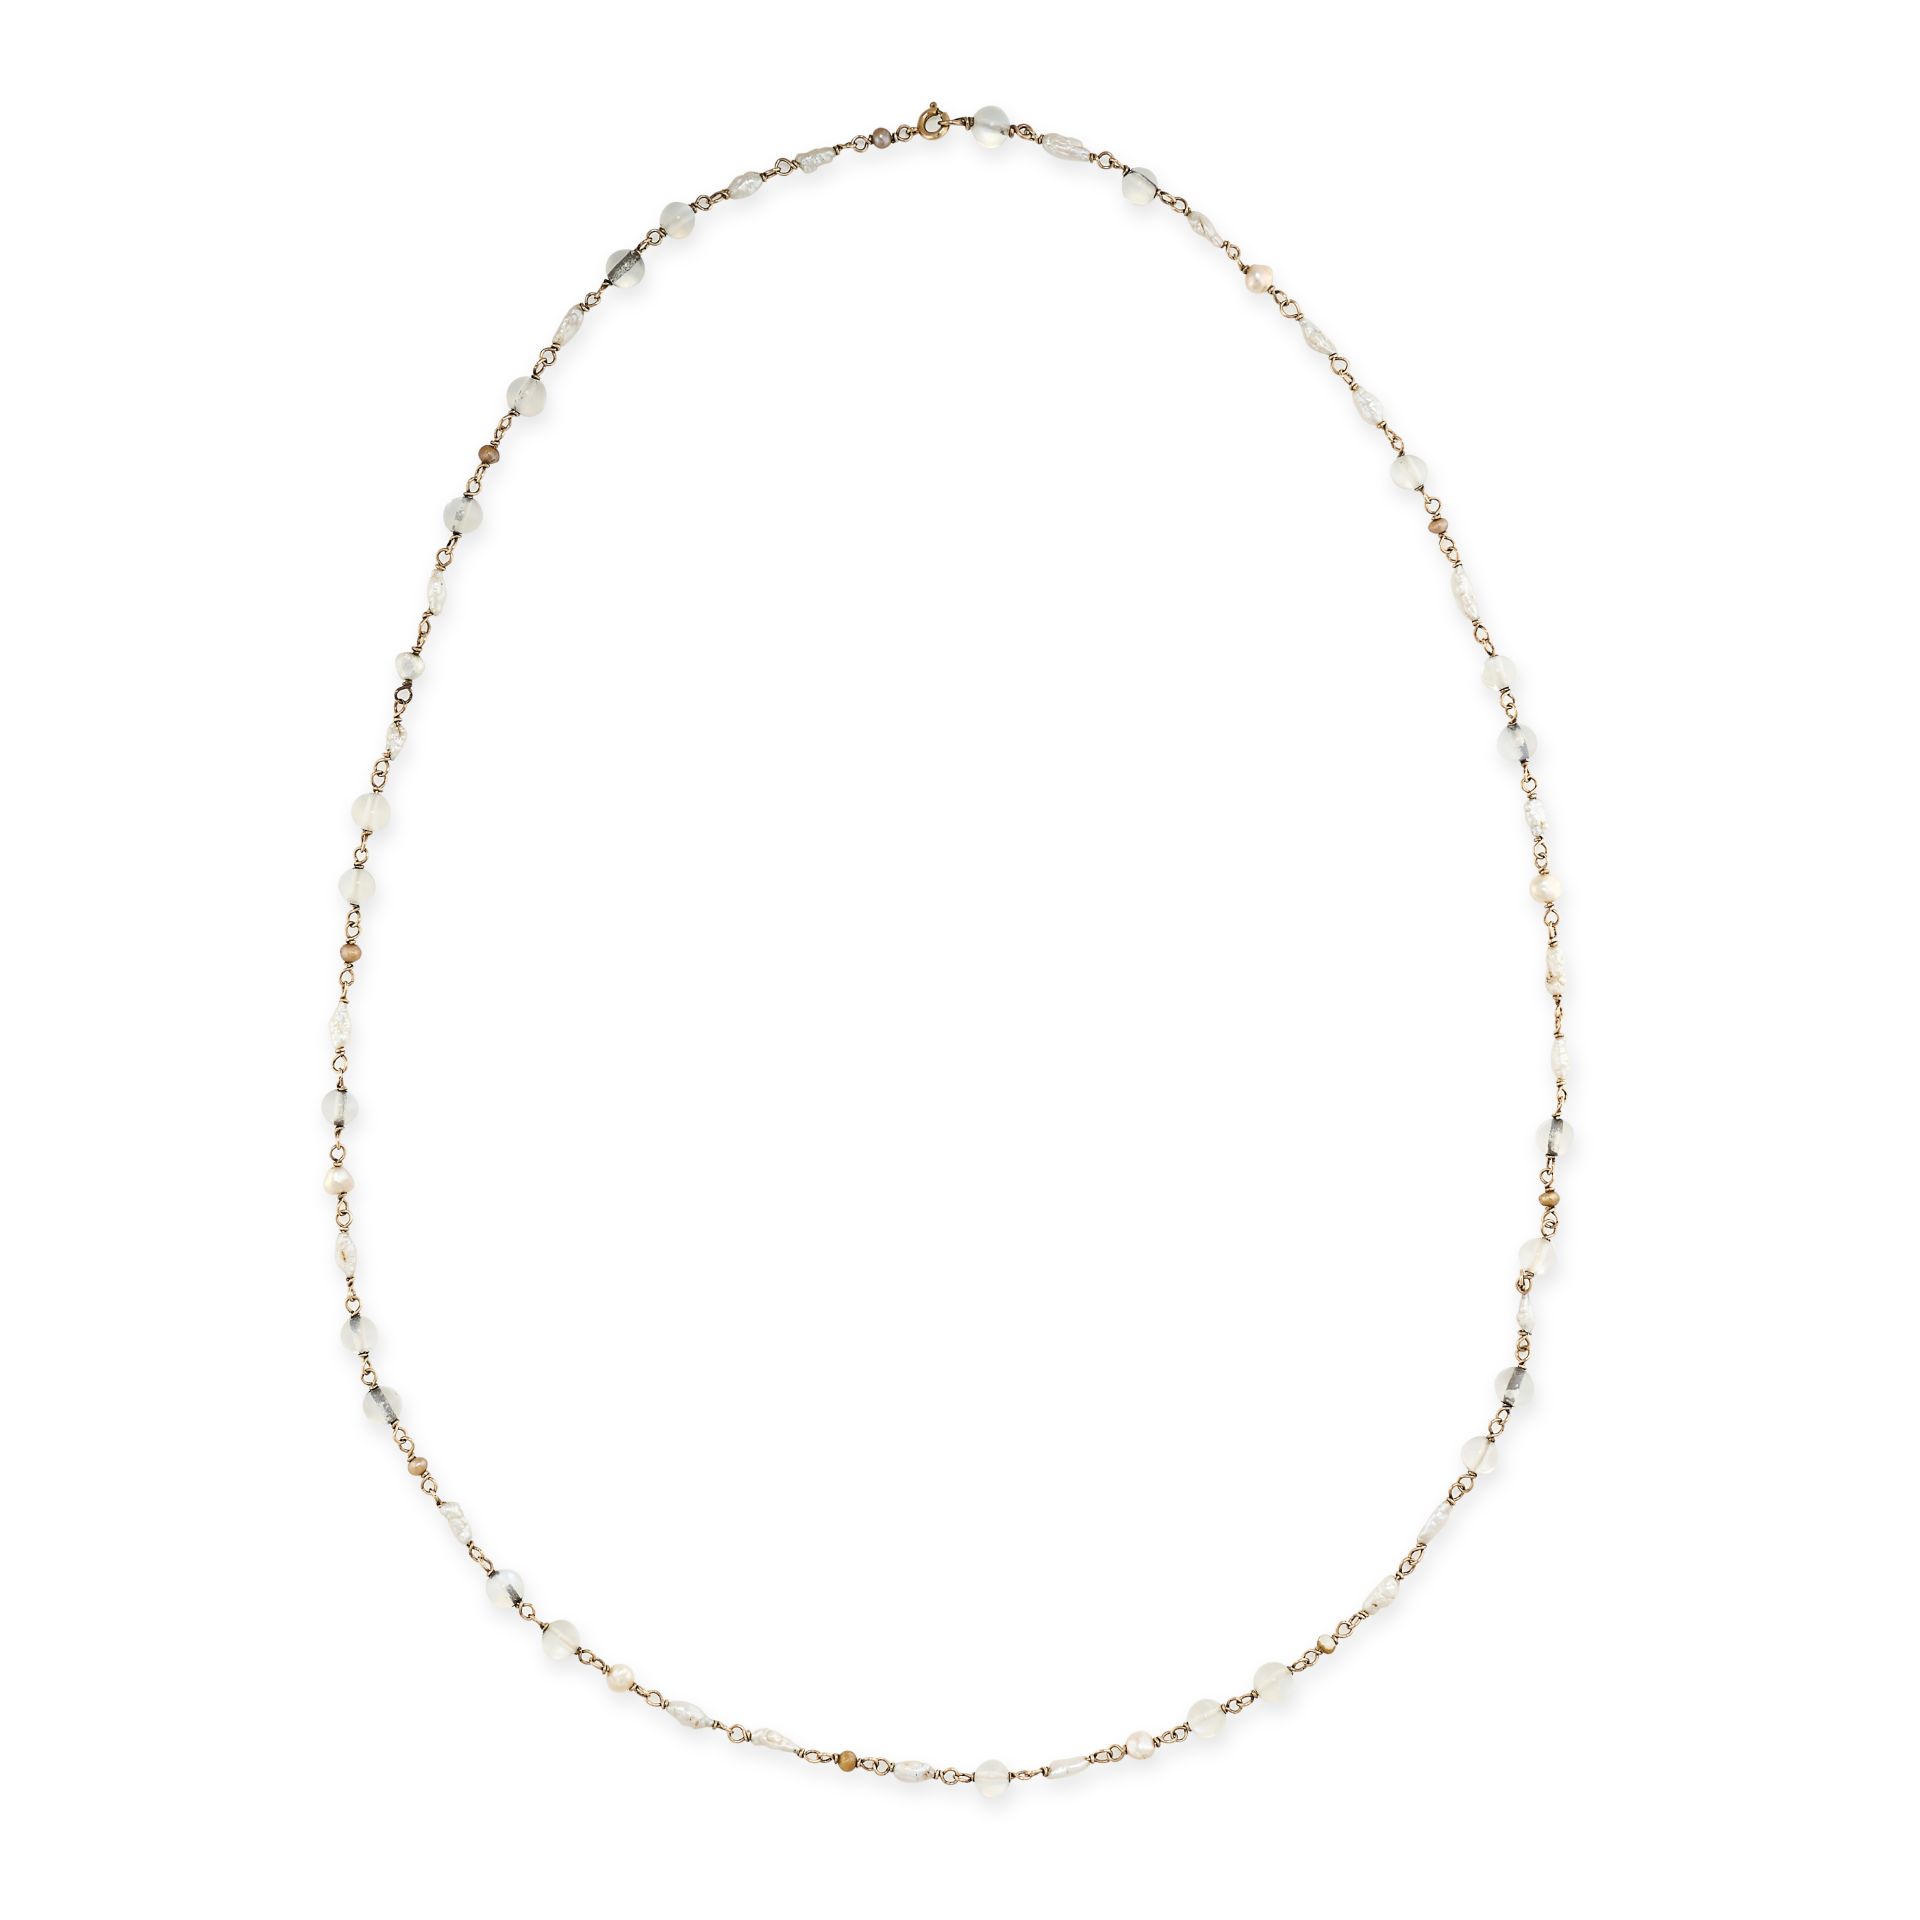 AN ANTIQUE BAROQUE PEARL AND MOONSTONE CHAIN NECKLACE in 9ct yellow gold, comprising a single row of